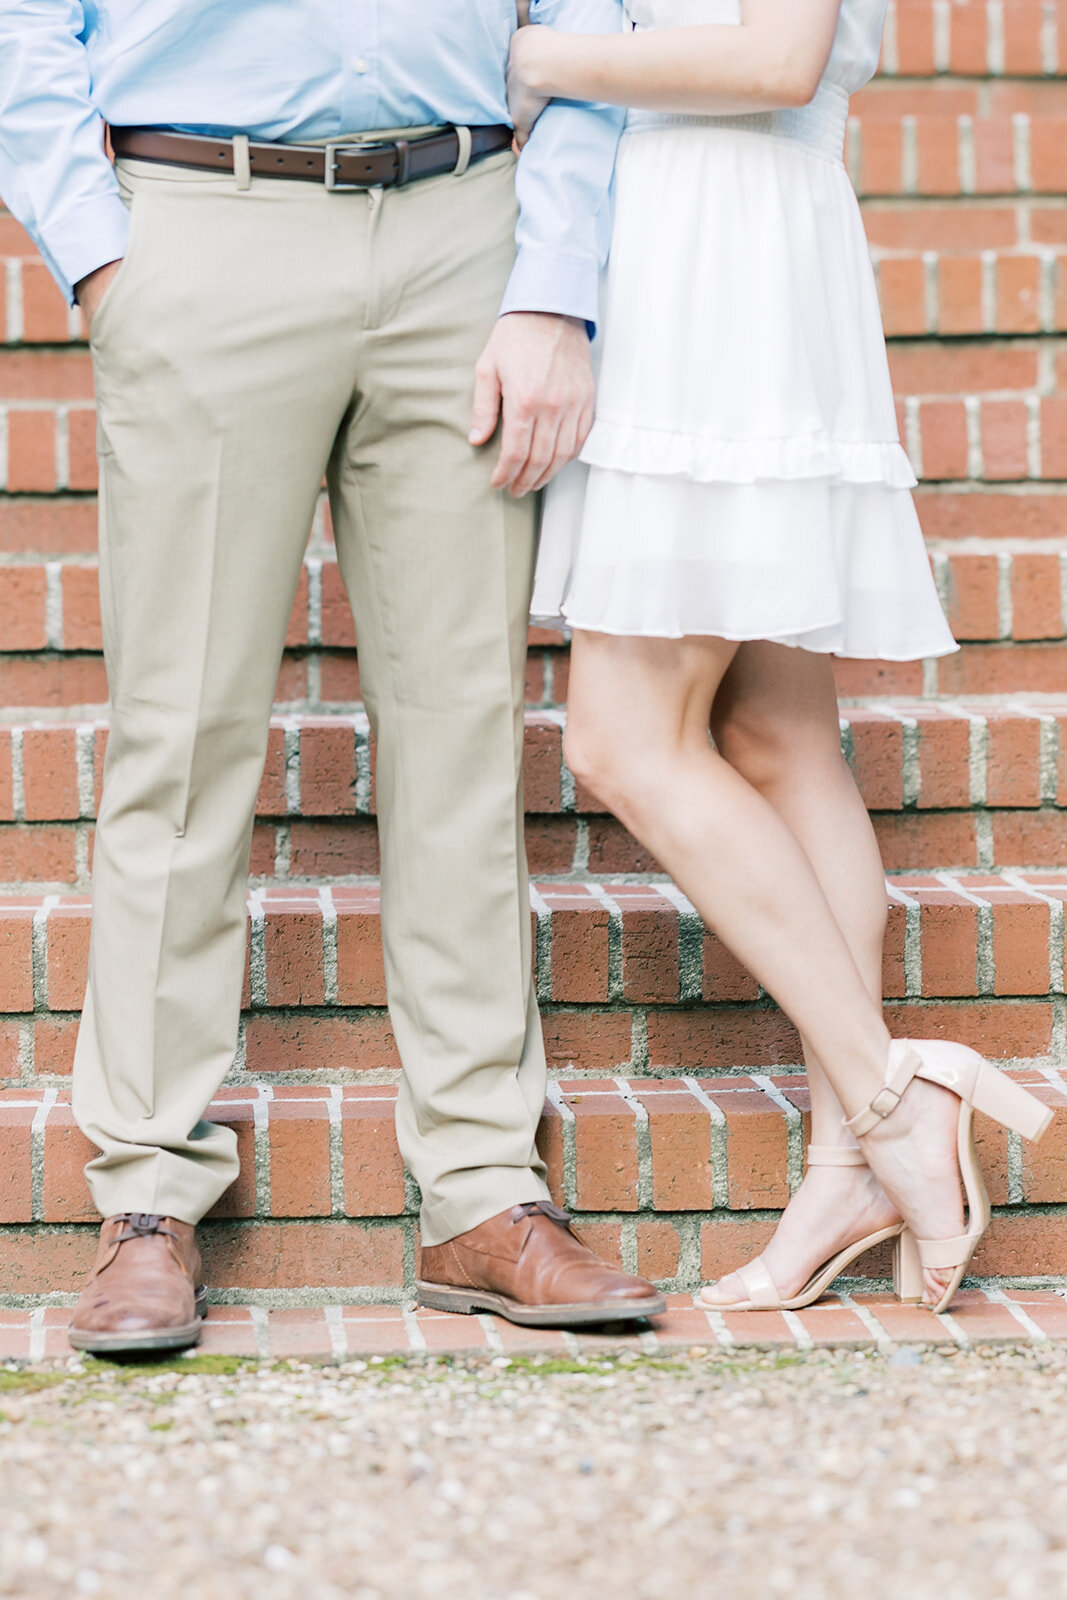 engagement-photo-neutral-outfits